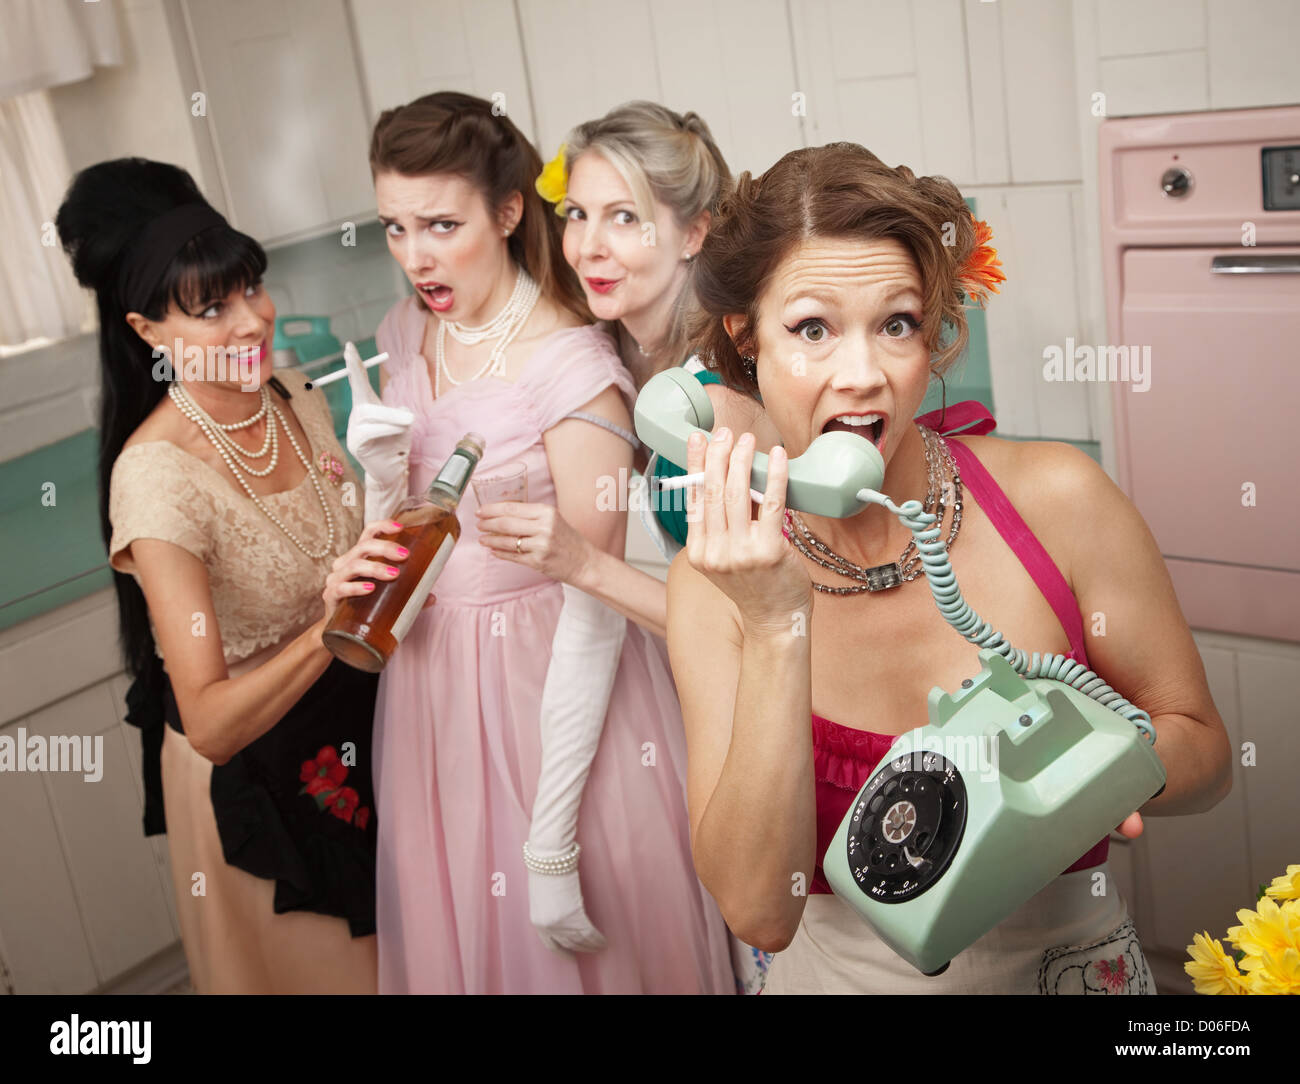 Retro-style woman yelling on phone while her friends drink and smoke Stock Photo